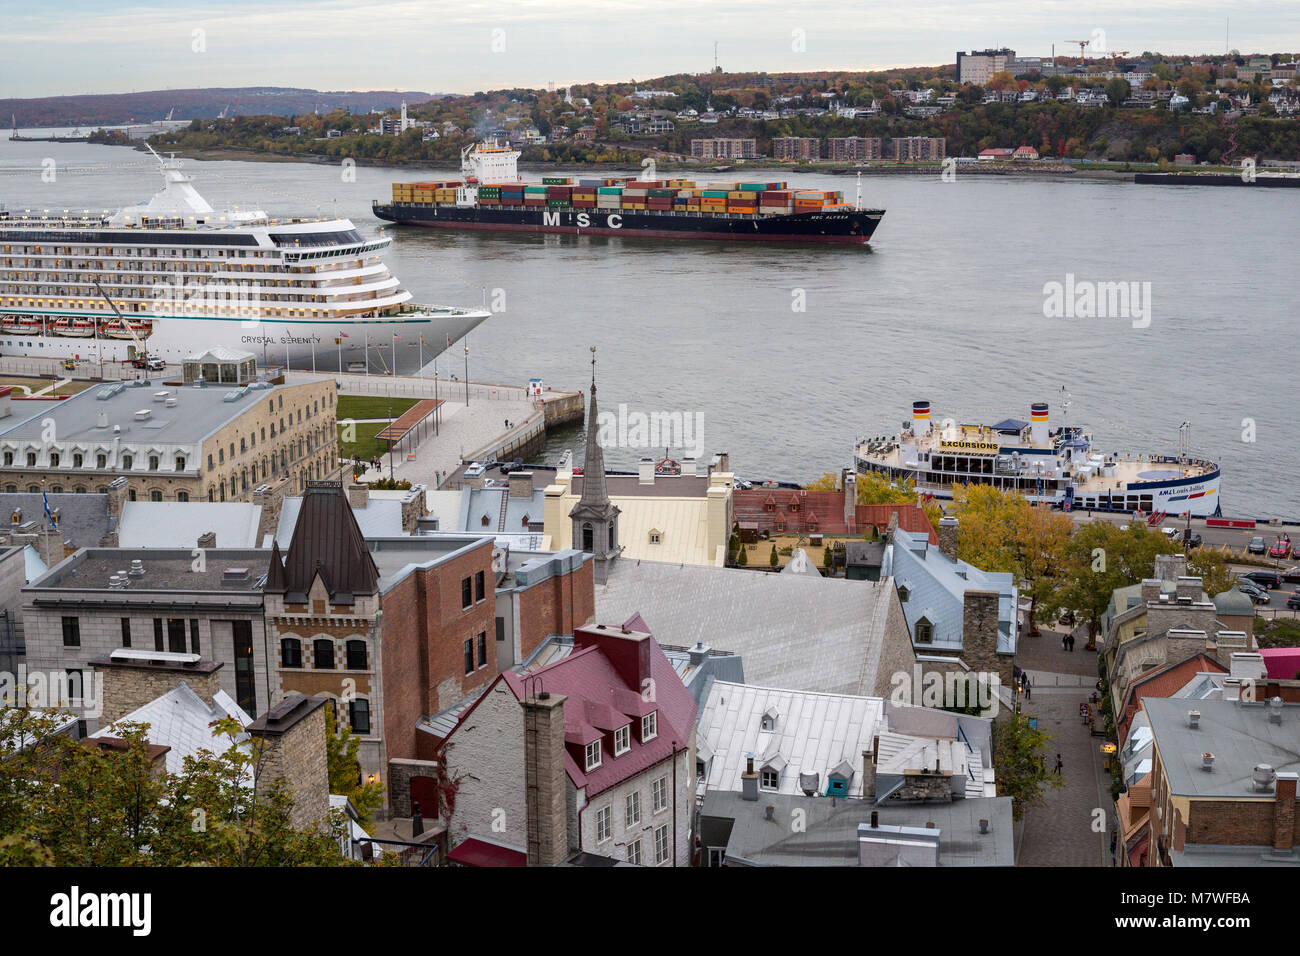 Quebec, Canada.  Ships on the St. Lawrence River.  Crystal Serenity Cruise Ship on left, Container Cargo Ship in Mid-river. Stock Photo